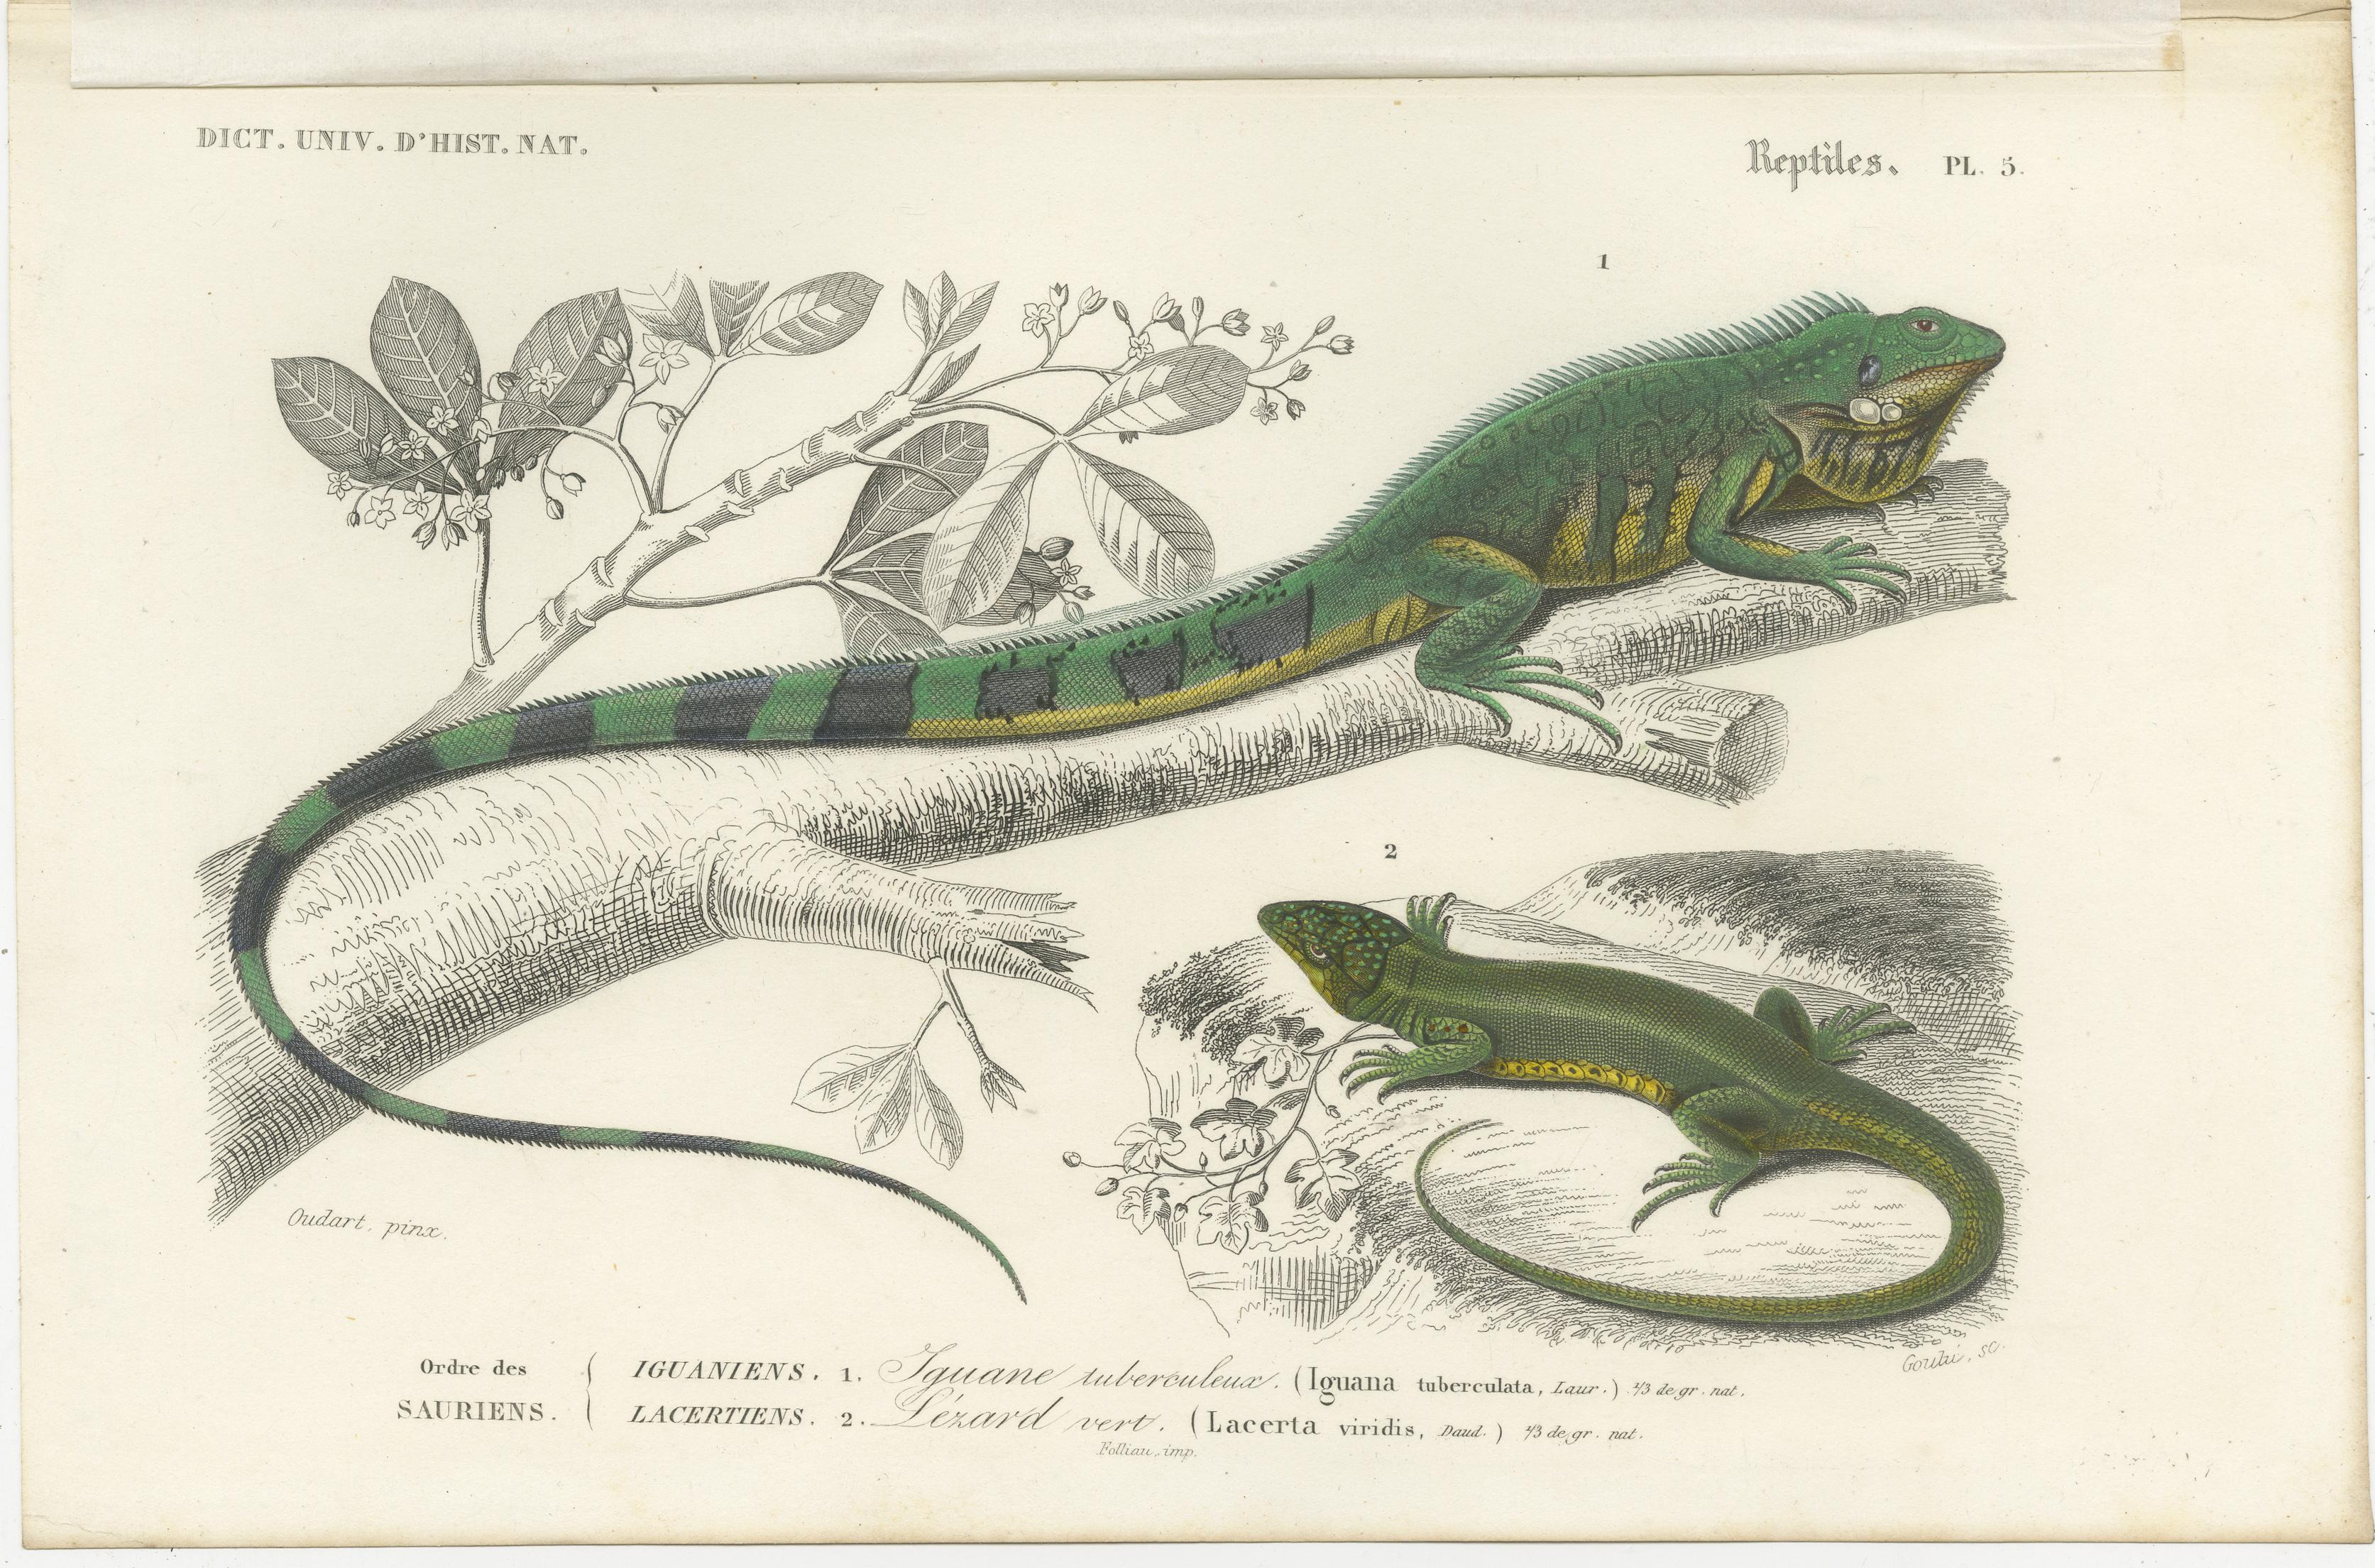 Antique print titled '1. Iguane tuberculeux, 2. Lezard vert. Original old print of a green iguana (a large lizard) and the European green lizard. This print originates from 'Dictionnaire universel d'Histoire Naturelle' by d'Orbigny. Published 1861.